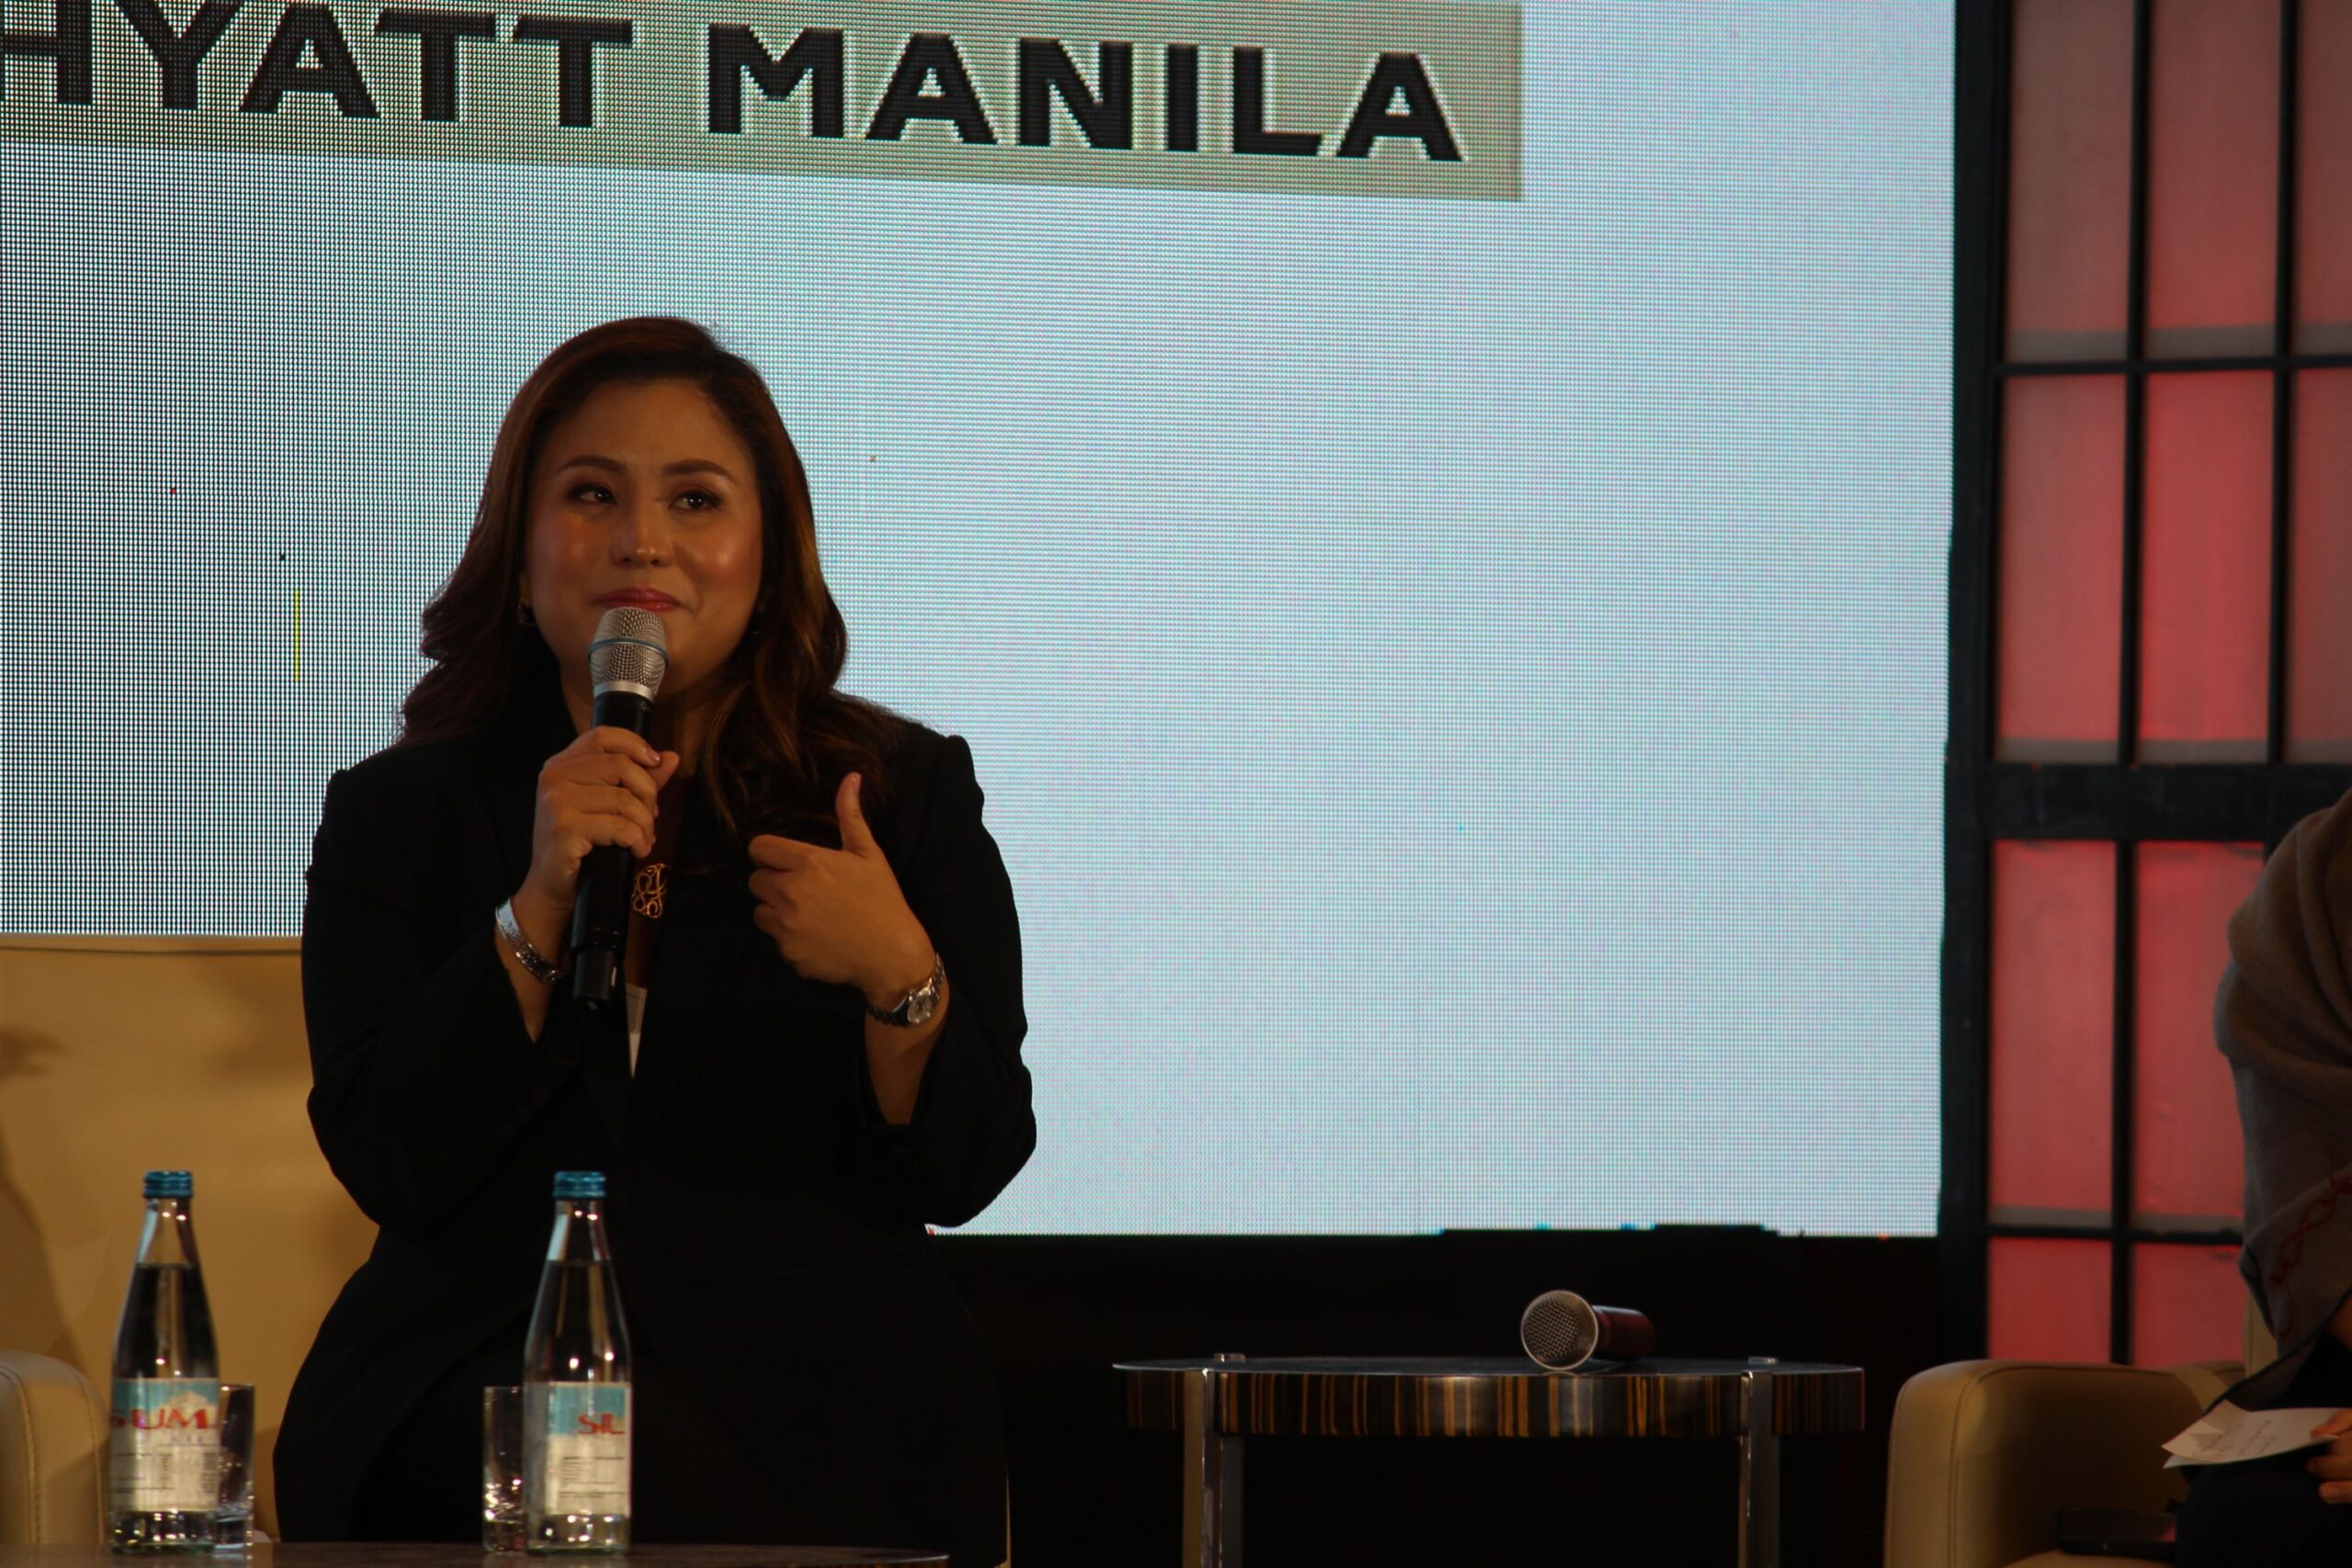 Global Dominion Financing Inc. President and COO Ms. Patricia Poco-Palacios shares insights on Artificial Intelligence